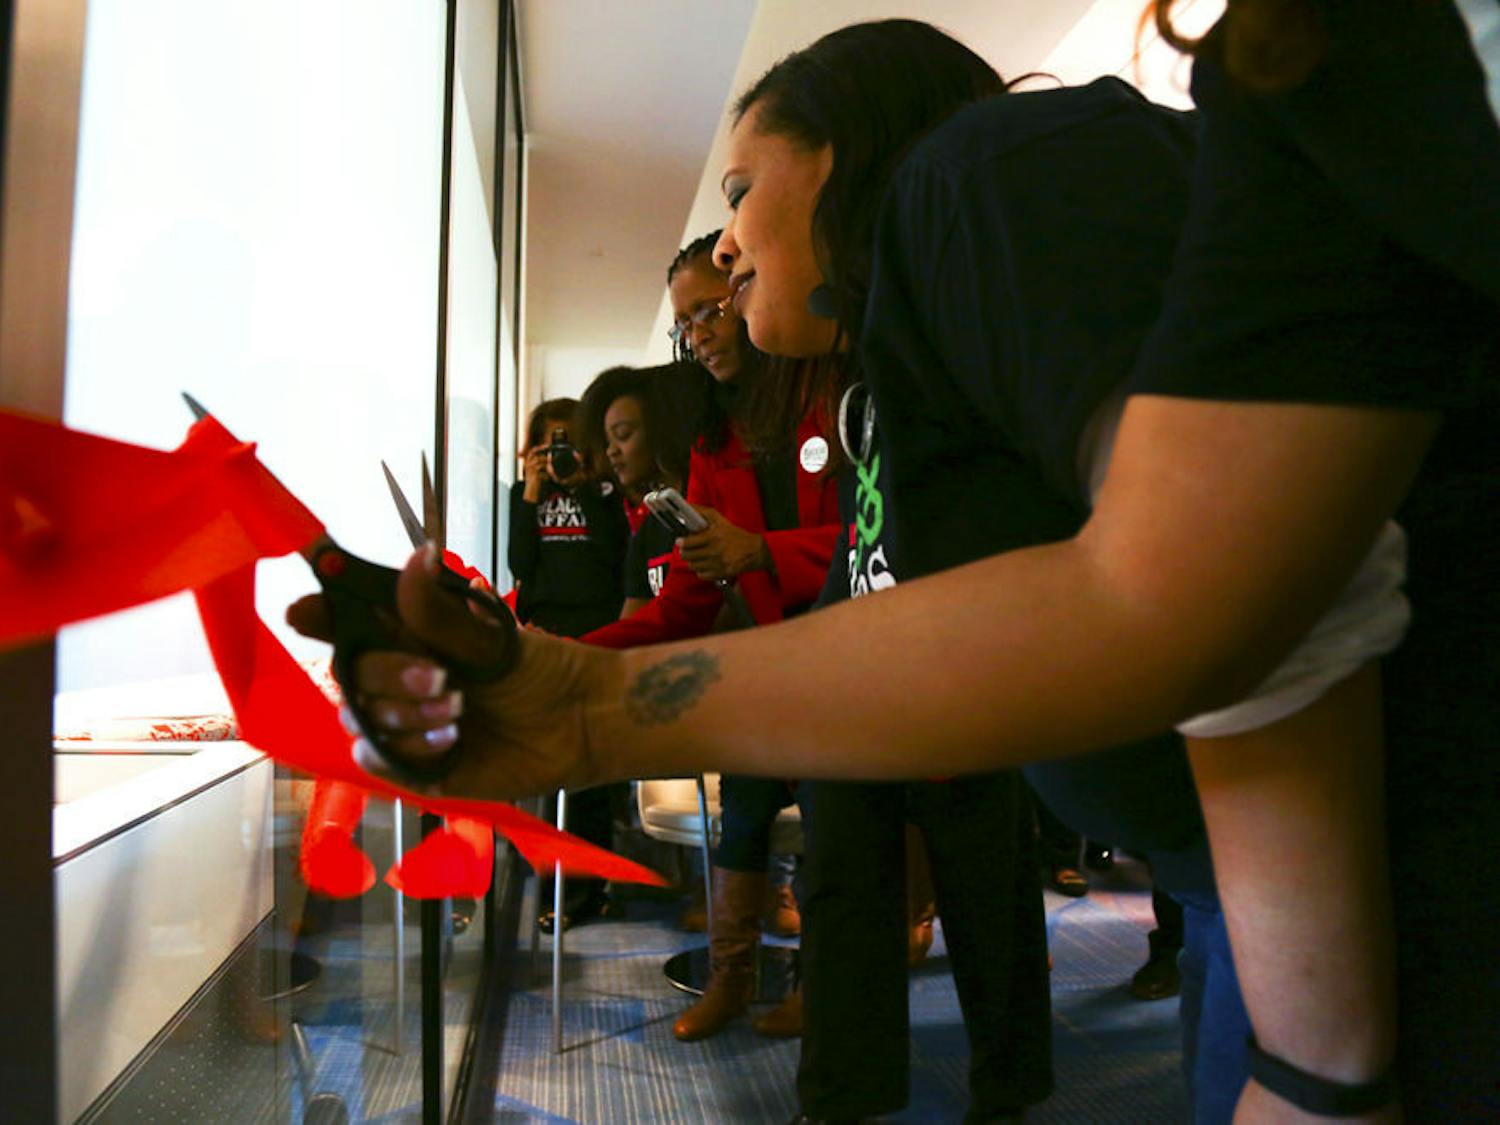 Susan Ajayi (second left), a 22-year-old UF family, youth and community sciences senior, cuts the ribbon along with others at the inauguration of the Black Enrichment Center at the Reitz Union on Thursday.